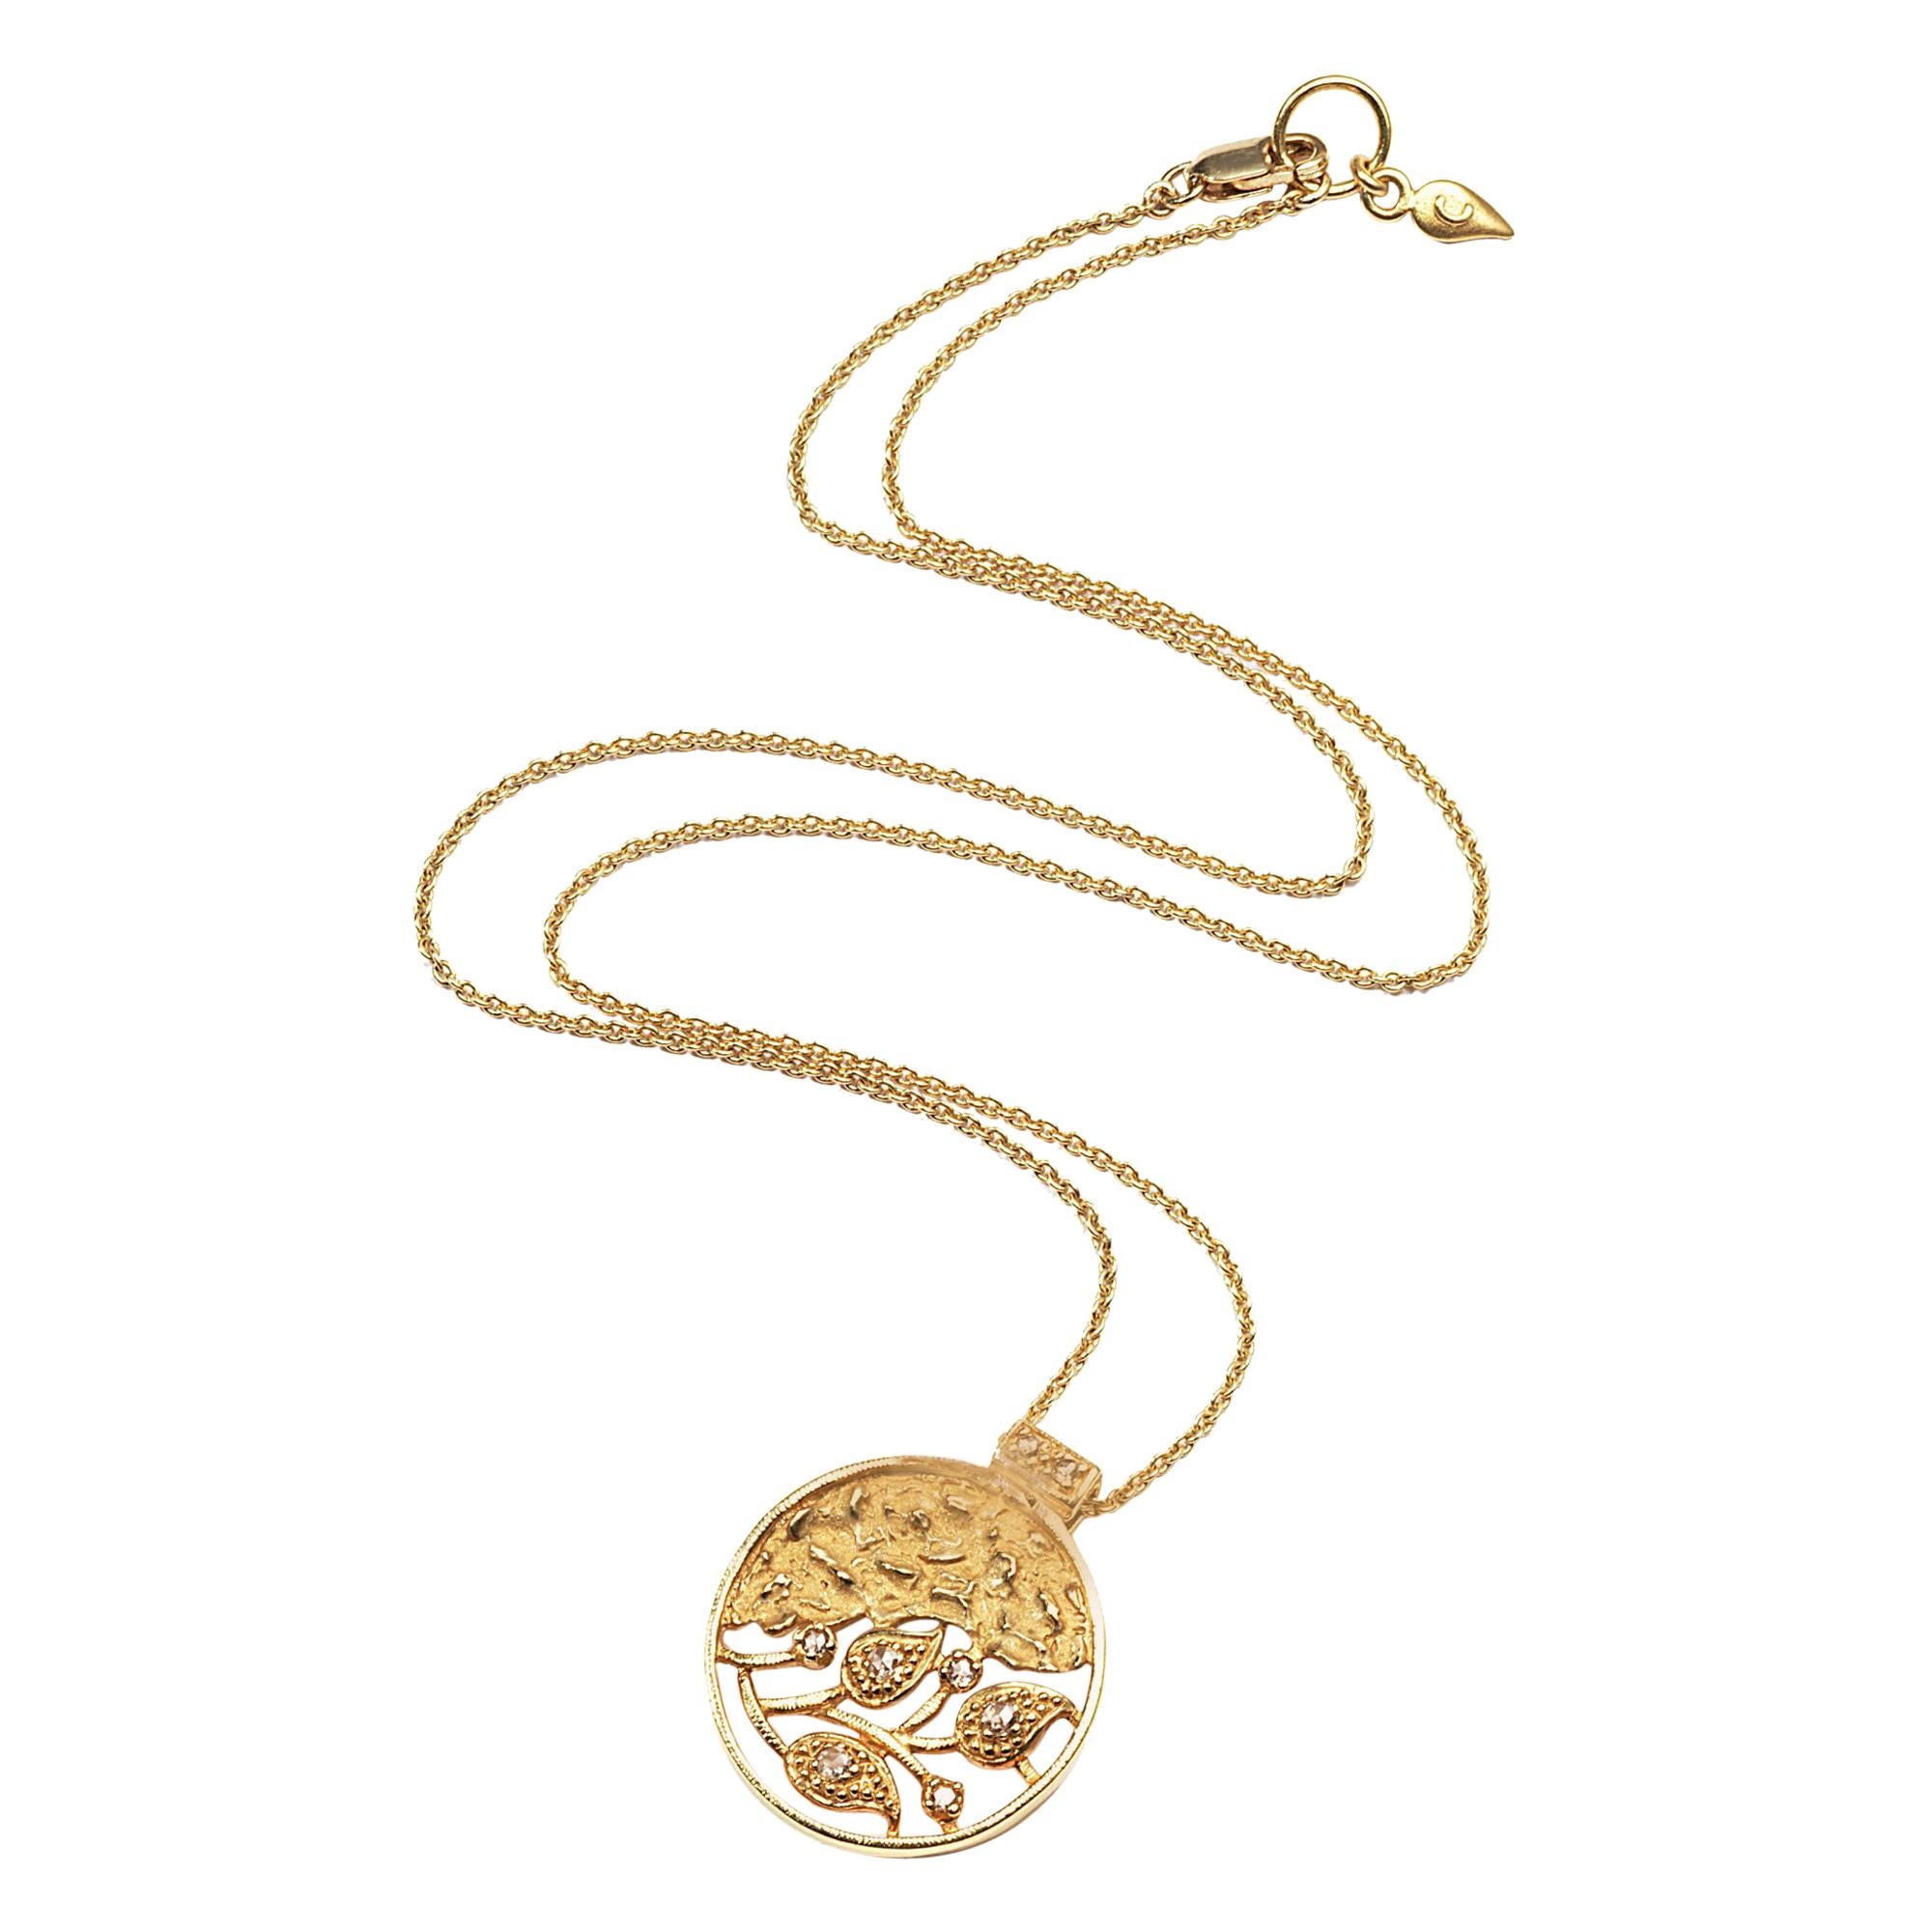 Coomi 20K Vine Coin Pendant with Rose Cut Diamonds on Chain